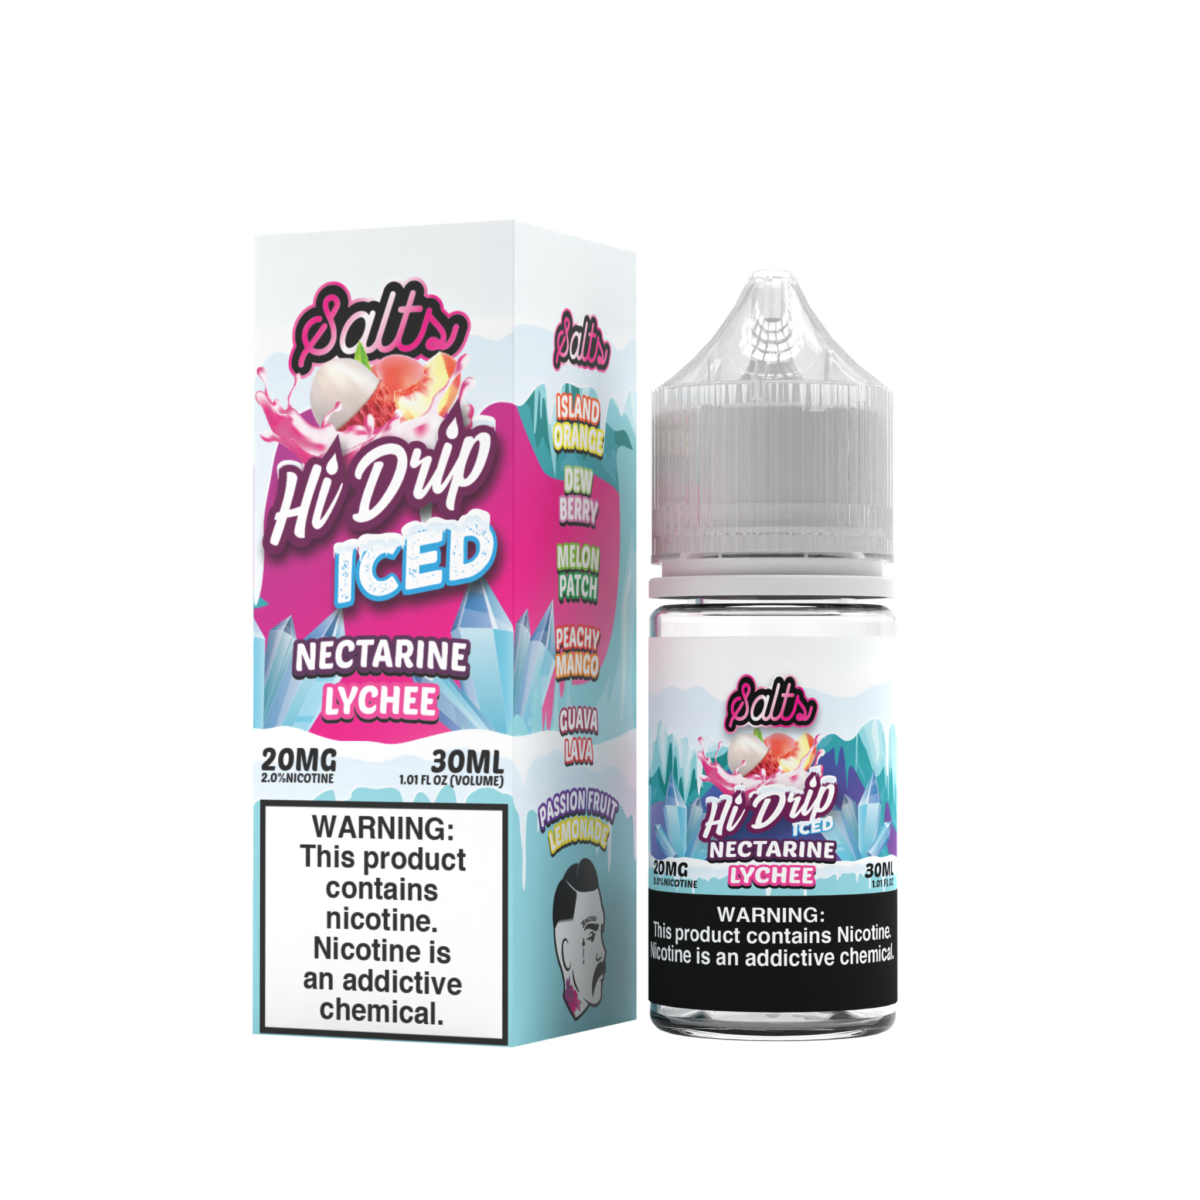 Nectarine Lychee Iced by Hi-Drip Salts Series 30mL with Packaging